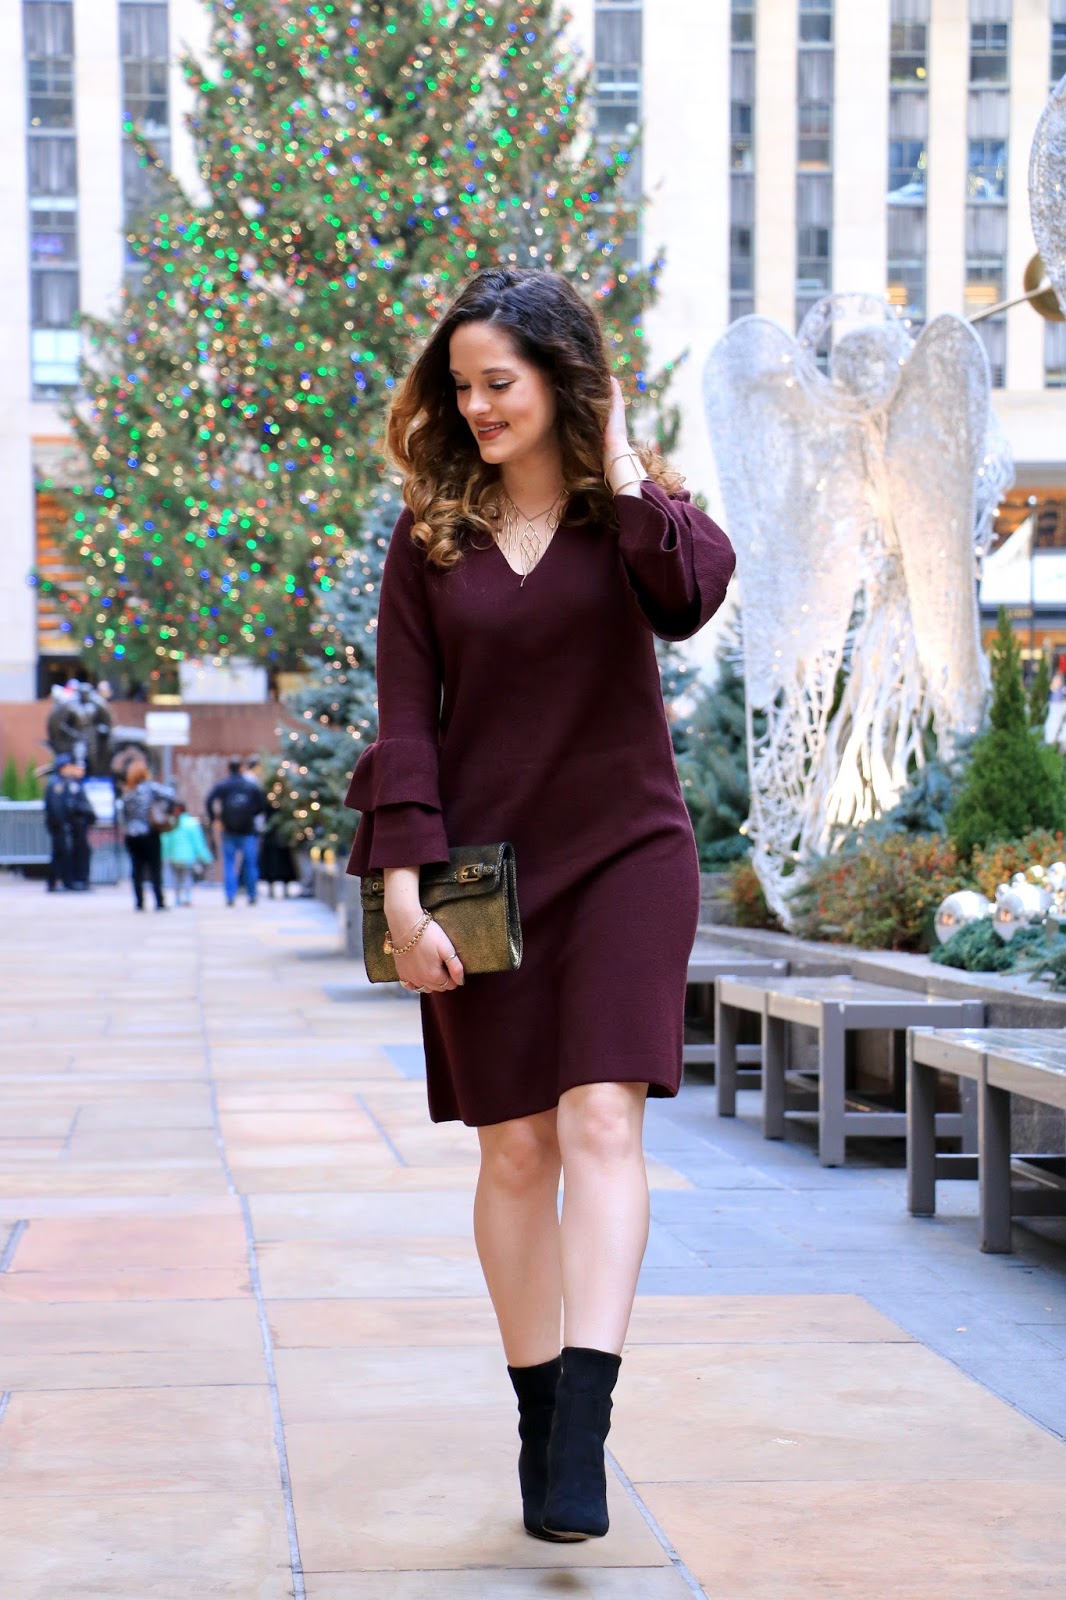 Nyc fashion blogger Kathleen Harper's holiday party outfit ideas